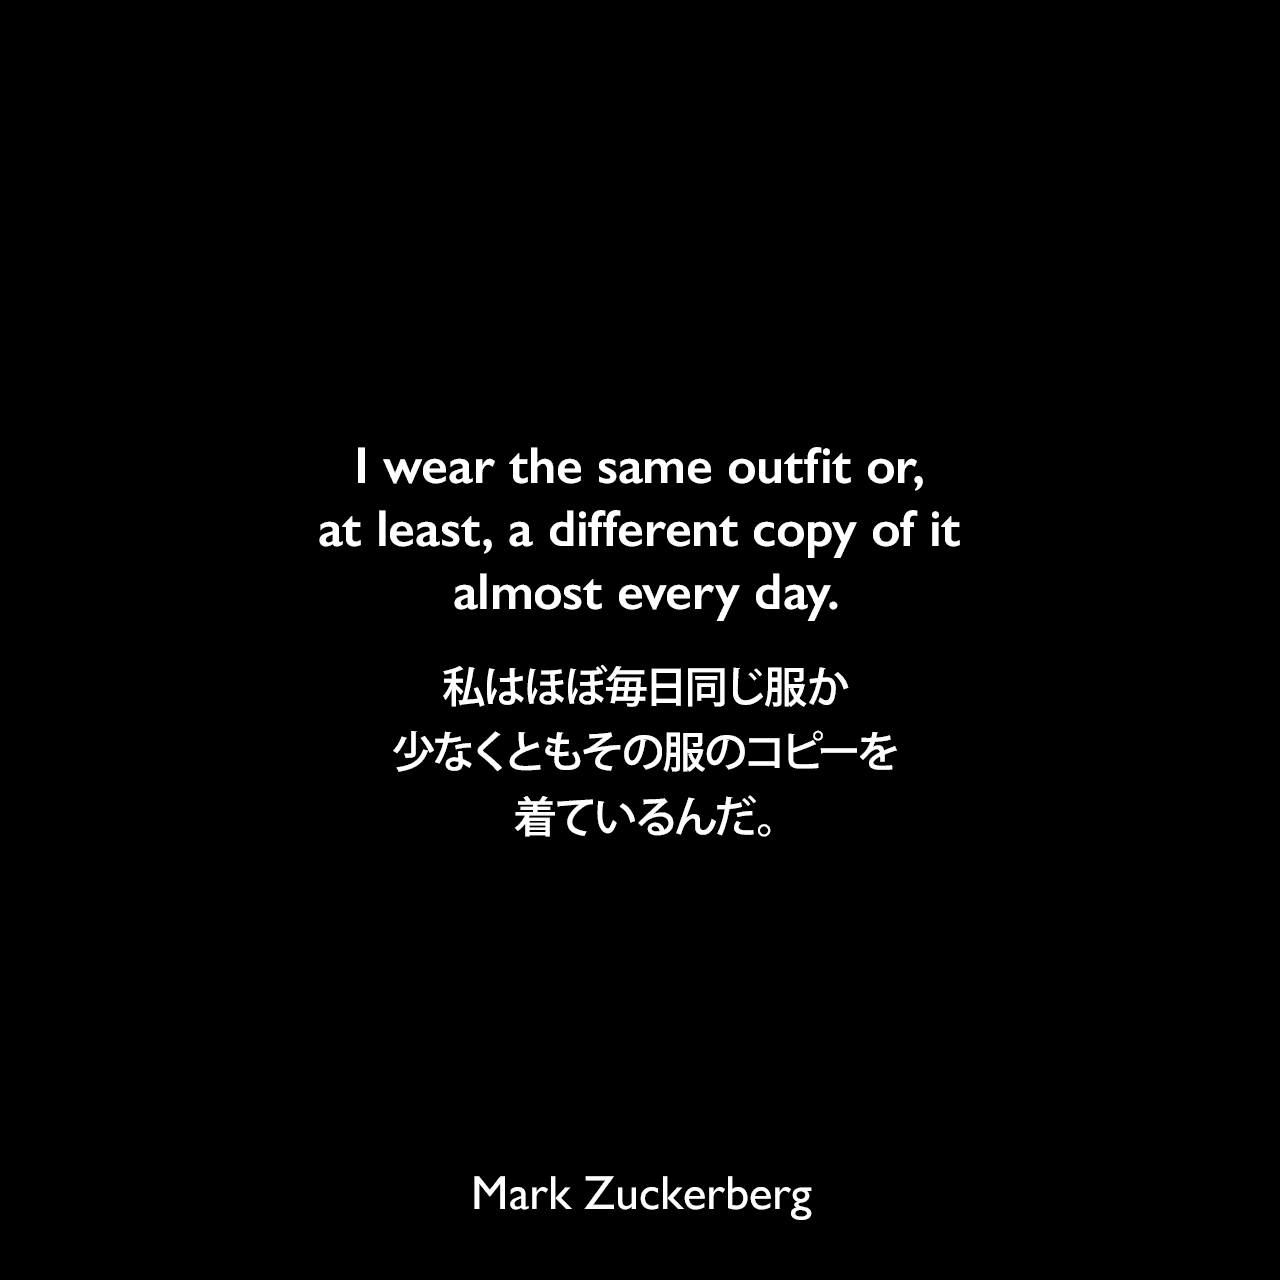 I wear the same outfit or, at least, a different copy of it almost every day.私はほぼ毎日同じ服か、少なくともその服のコピーを着ているんだ。Mark Zuckerberg